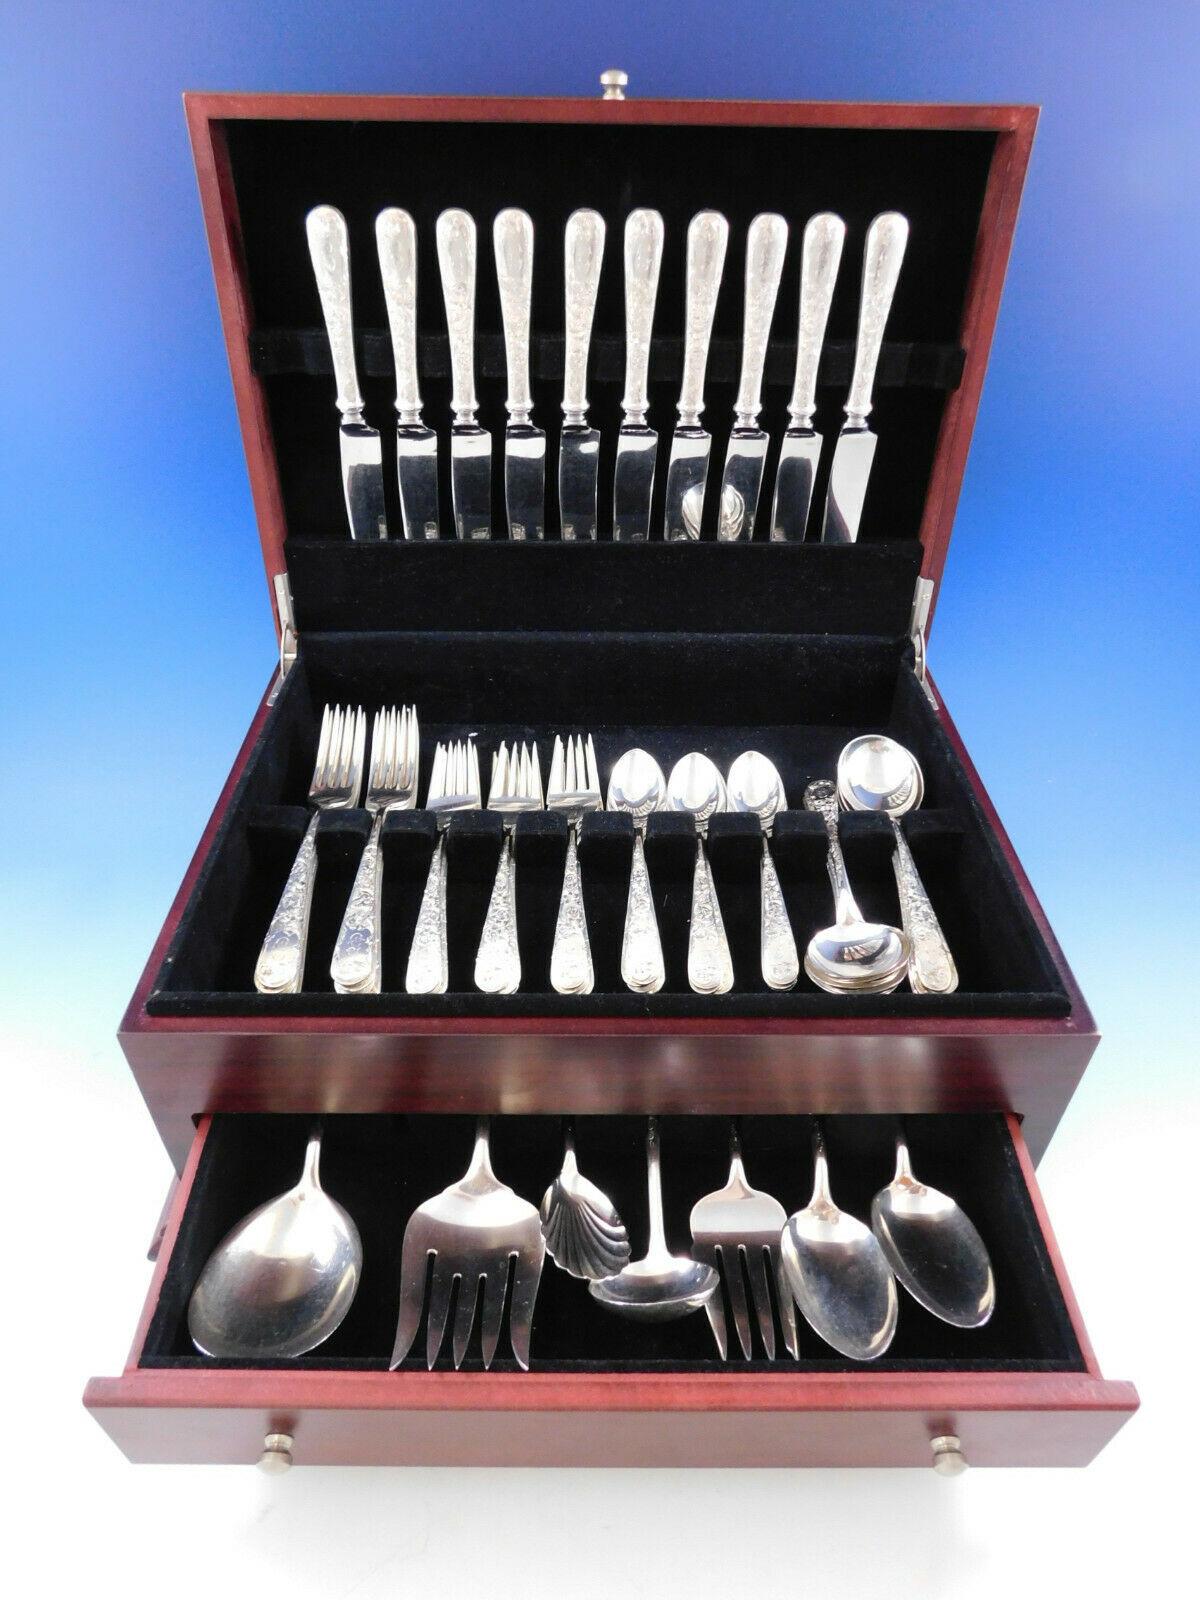 Stunning Old Maryland Engraved by Kirk sterling silver flatware set, 57 pieces. This set includes:

10 knives, 8 7/8